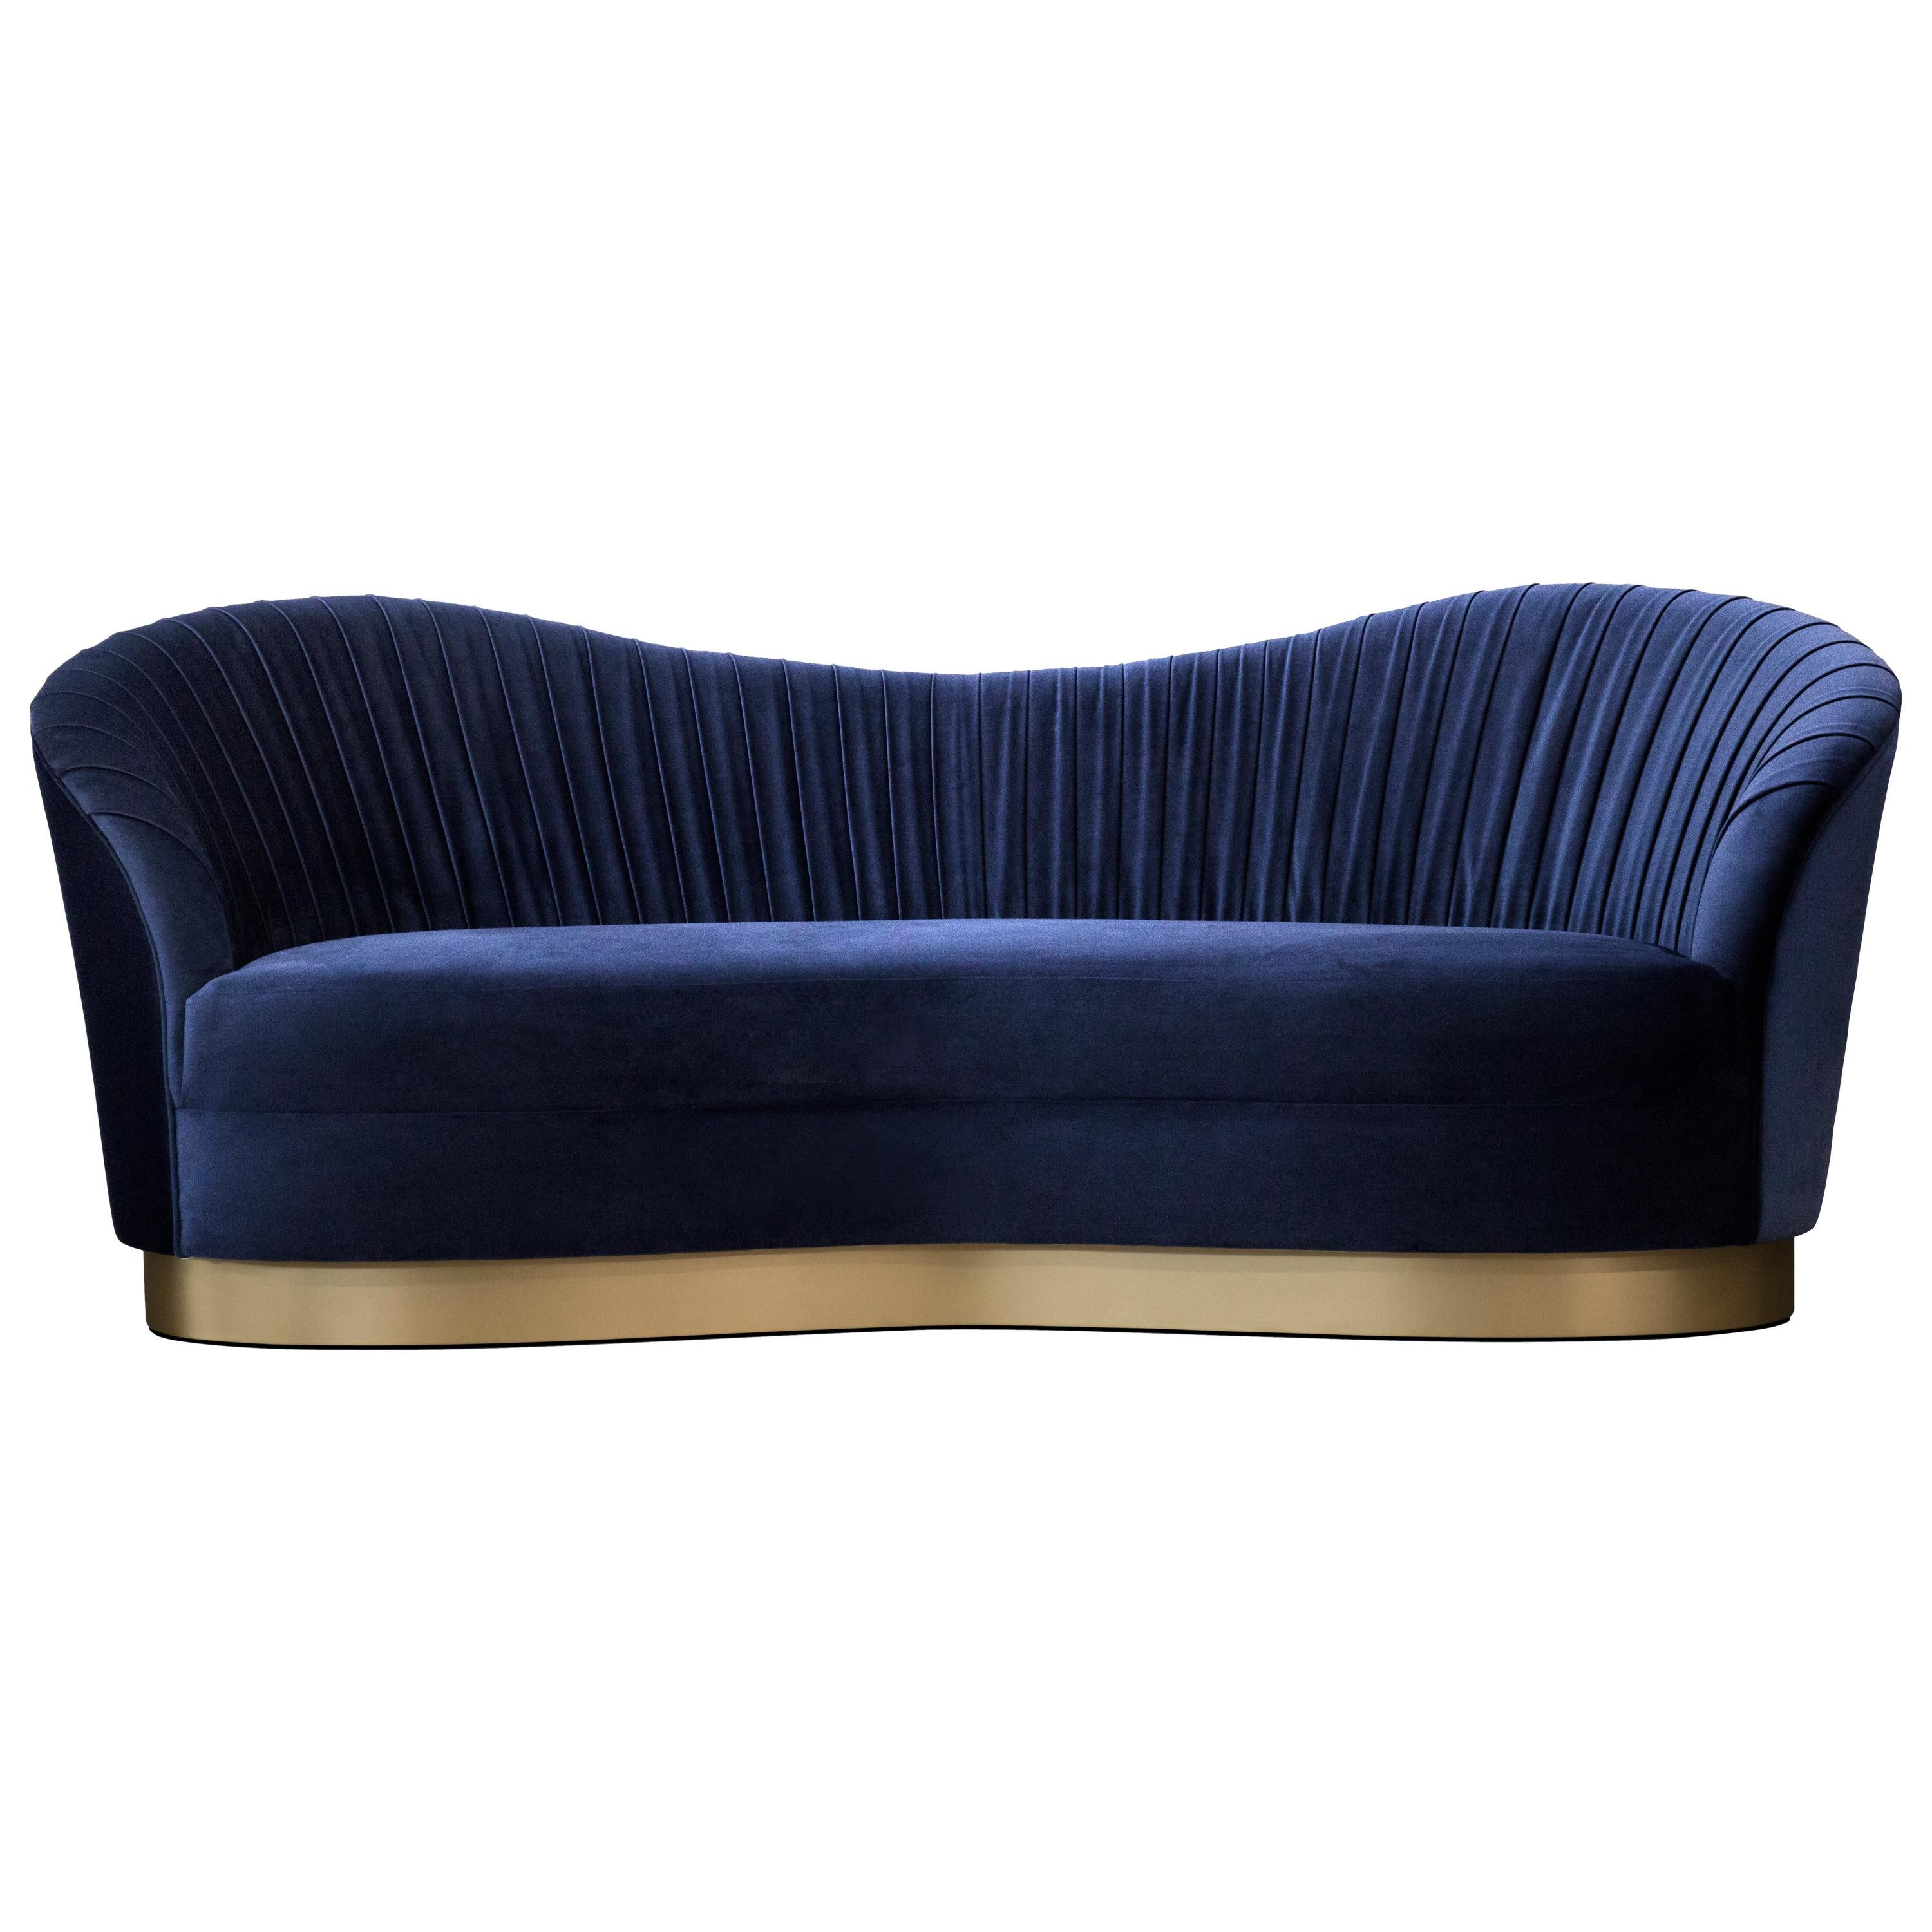 The lux and bodacious Kelly sofa is the cool girl sipping Cosmos in the dark corner of a chic NYC lounge. Her fluid curves are harmoniously matched by sumptuous pleated waves of soft upholstery fabric. Her tell is a striking metal band hugging the